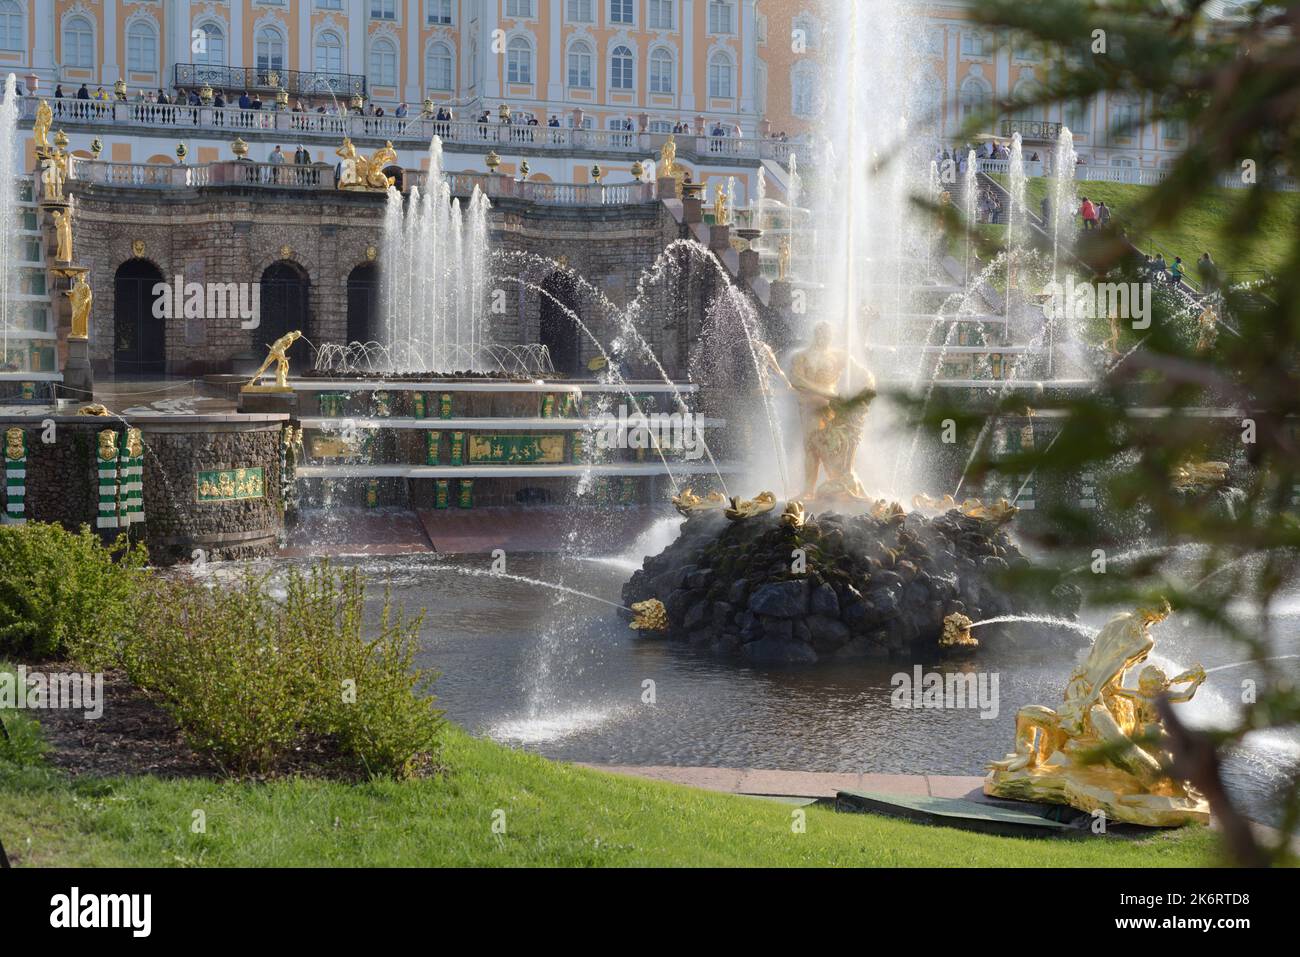 Grand Cascade in Peterhof, St. Petersburg, Russia. The cascade was built in 1715-1724 and is one of the remarkable fountain constructions in the world Stock Photo